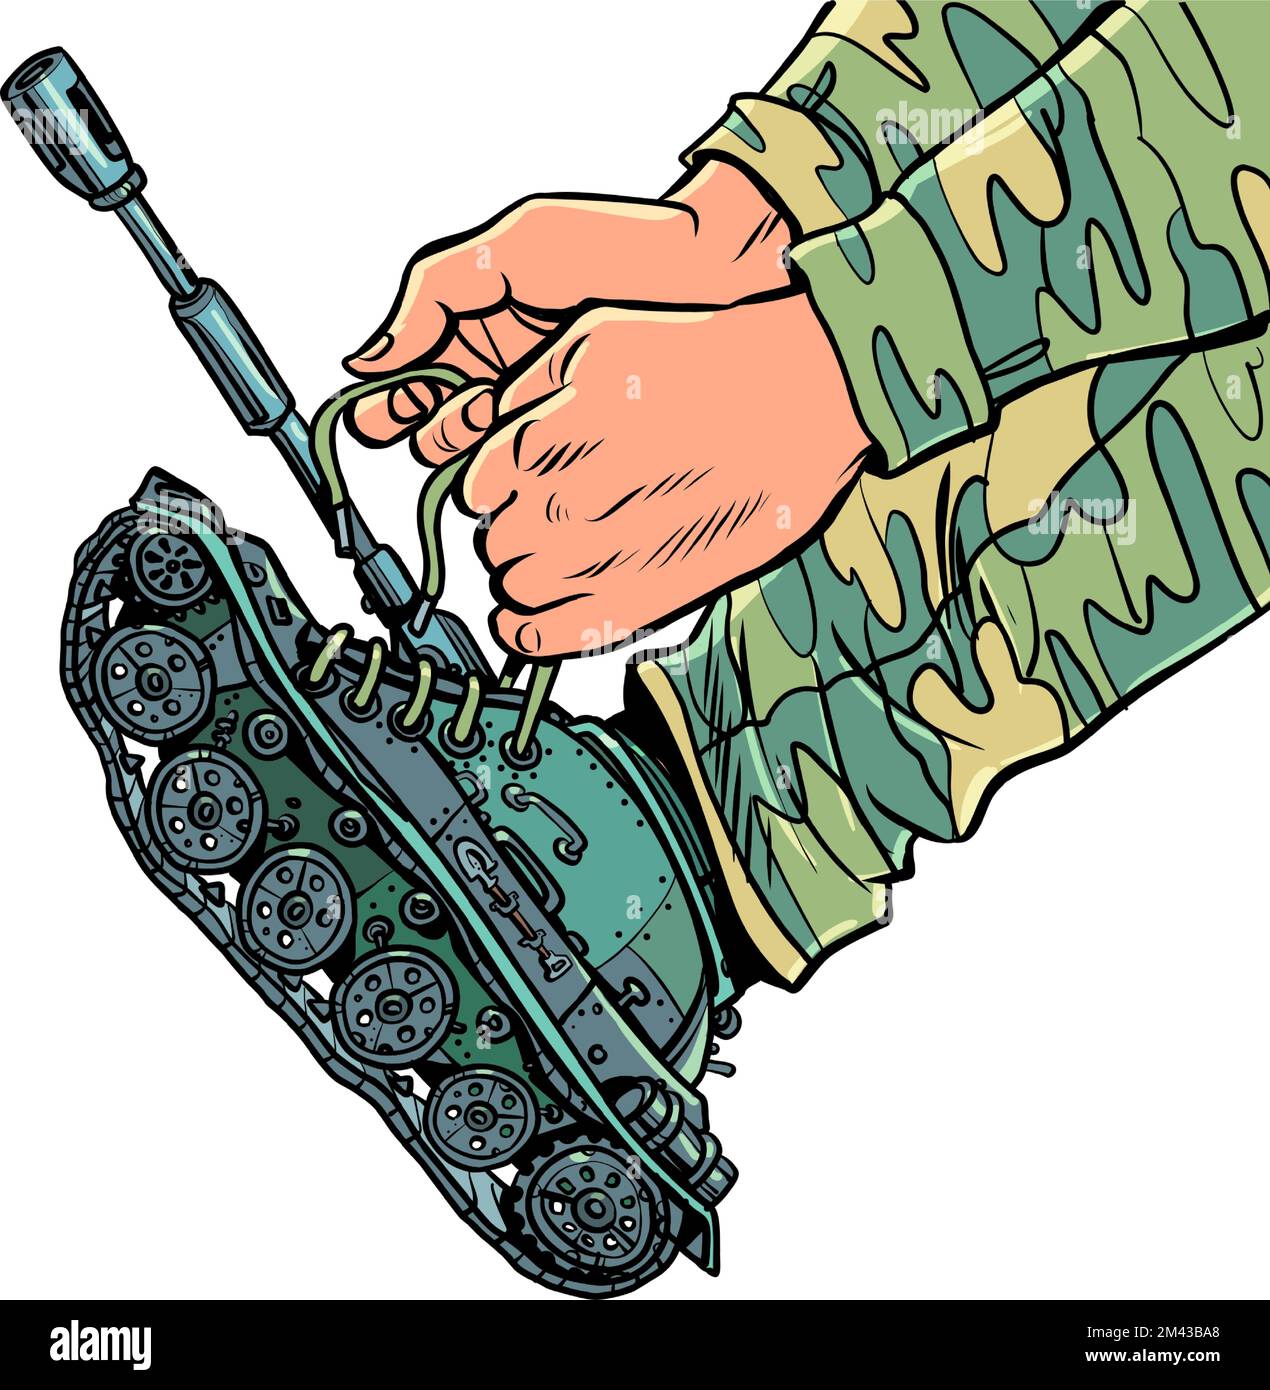 A uniformed soldier puts on tanks instead of boots. Concept army war mobilization Stock Vector